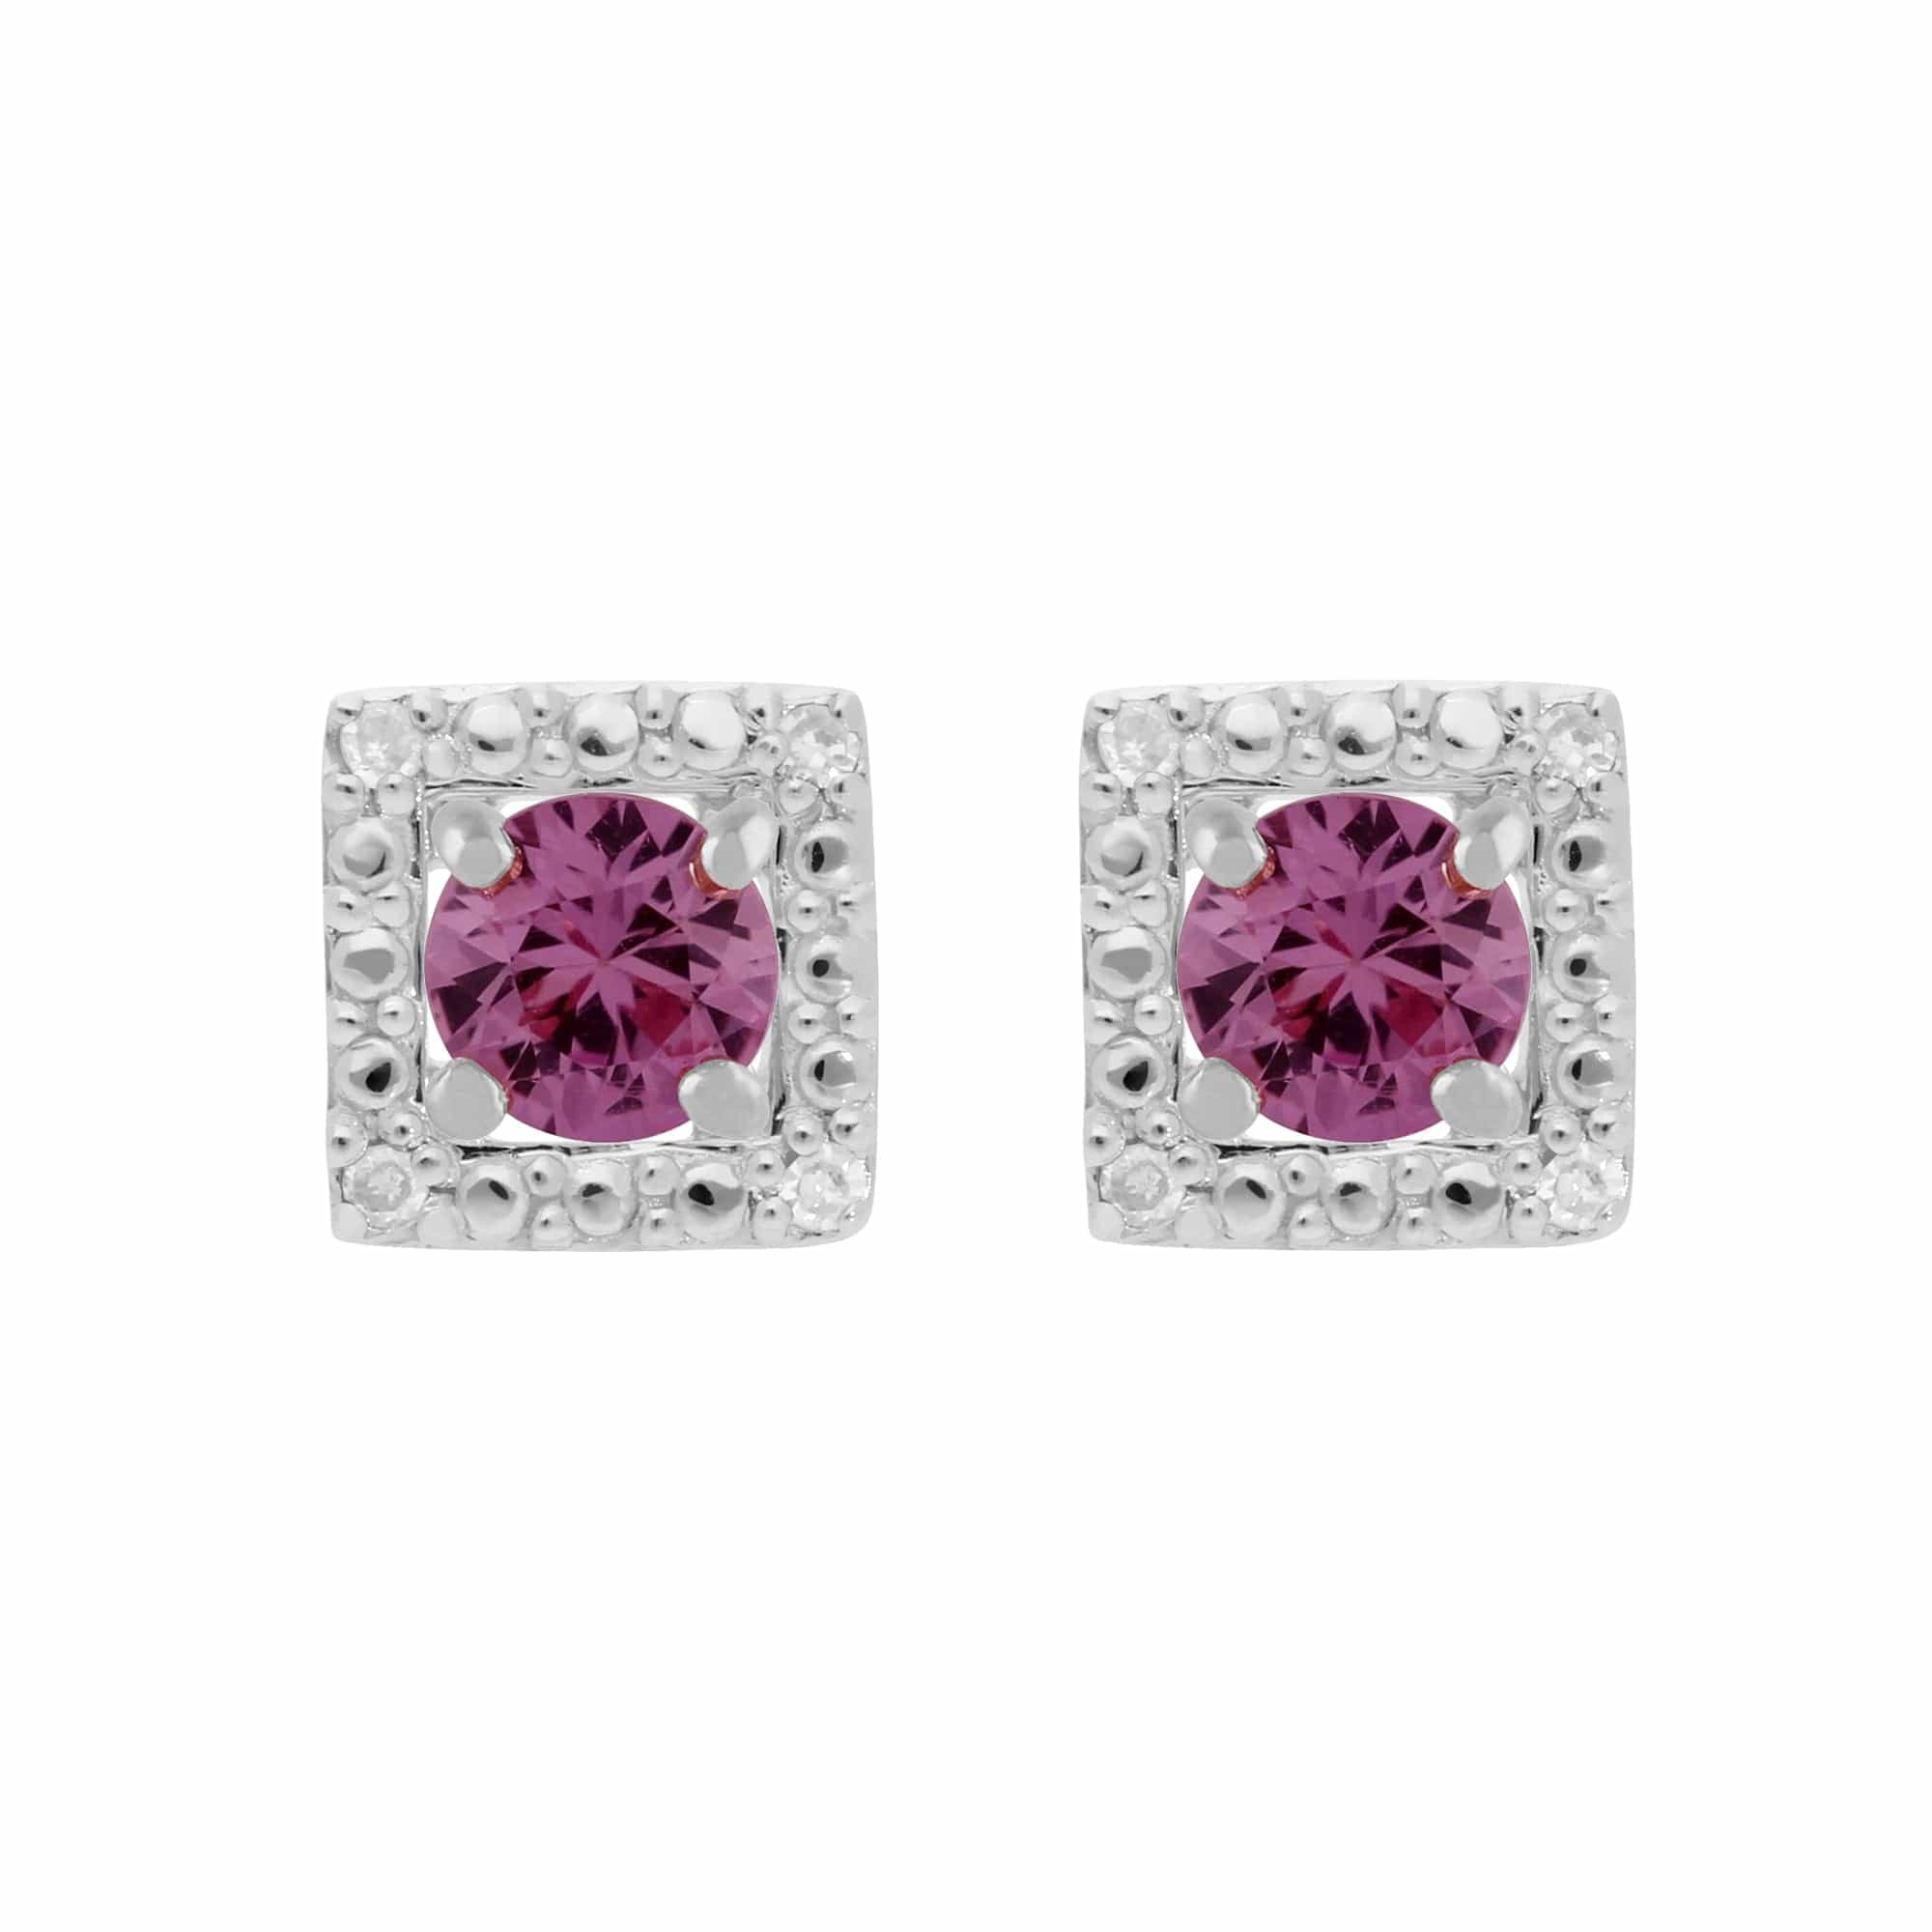 117E0031159-162E0245019 Classic Round Pink Sapphire Studs with Detachable Diamond Square Ear Jacket in 9ct White Gold 1